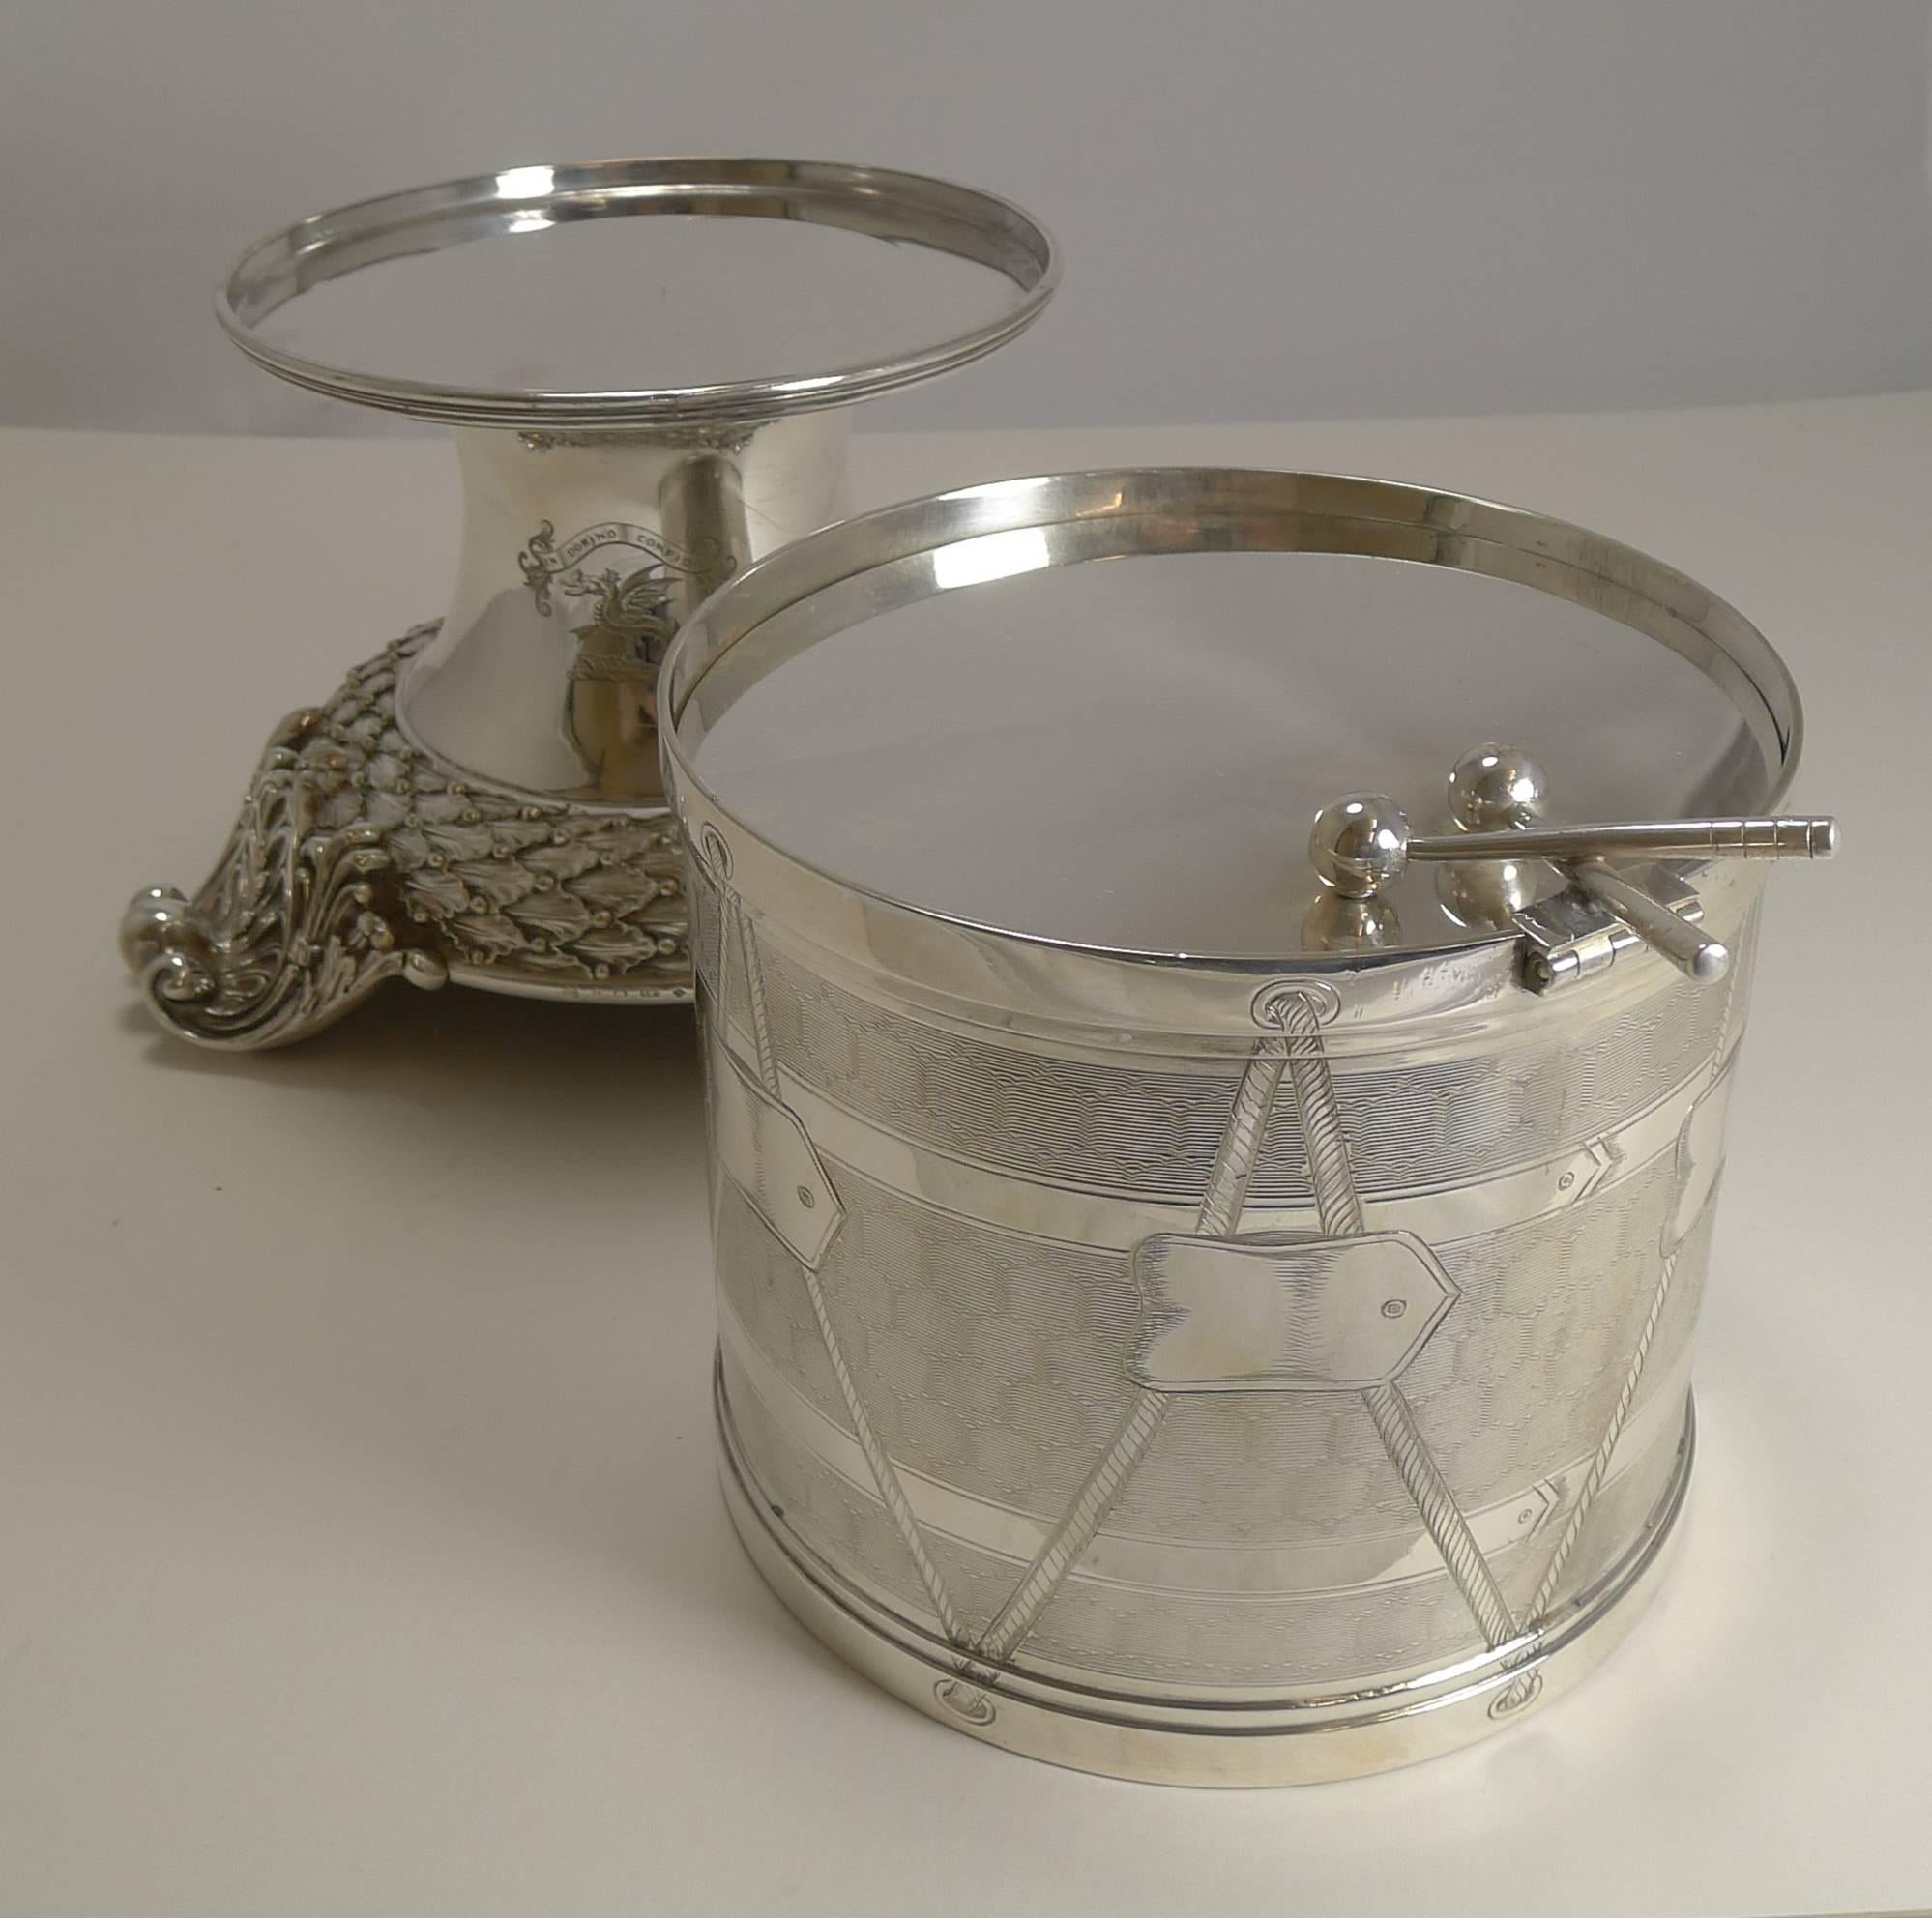 Mid-19th Century Magnificent and Rare Early Silver Plated Drum Biscuit Box on Stand, 1844 For Sale